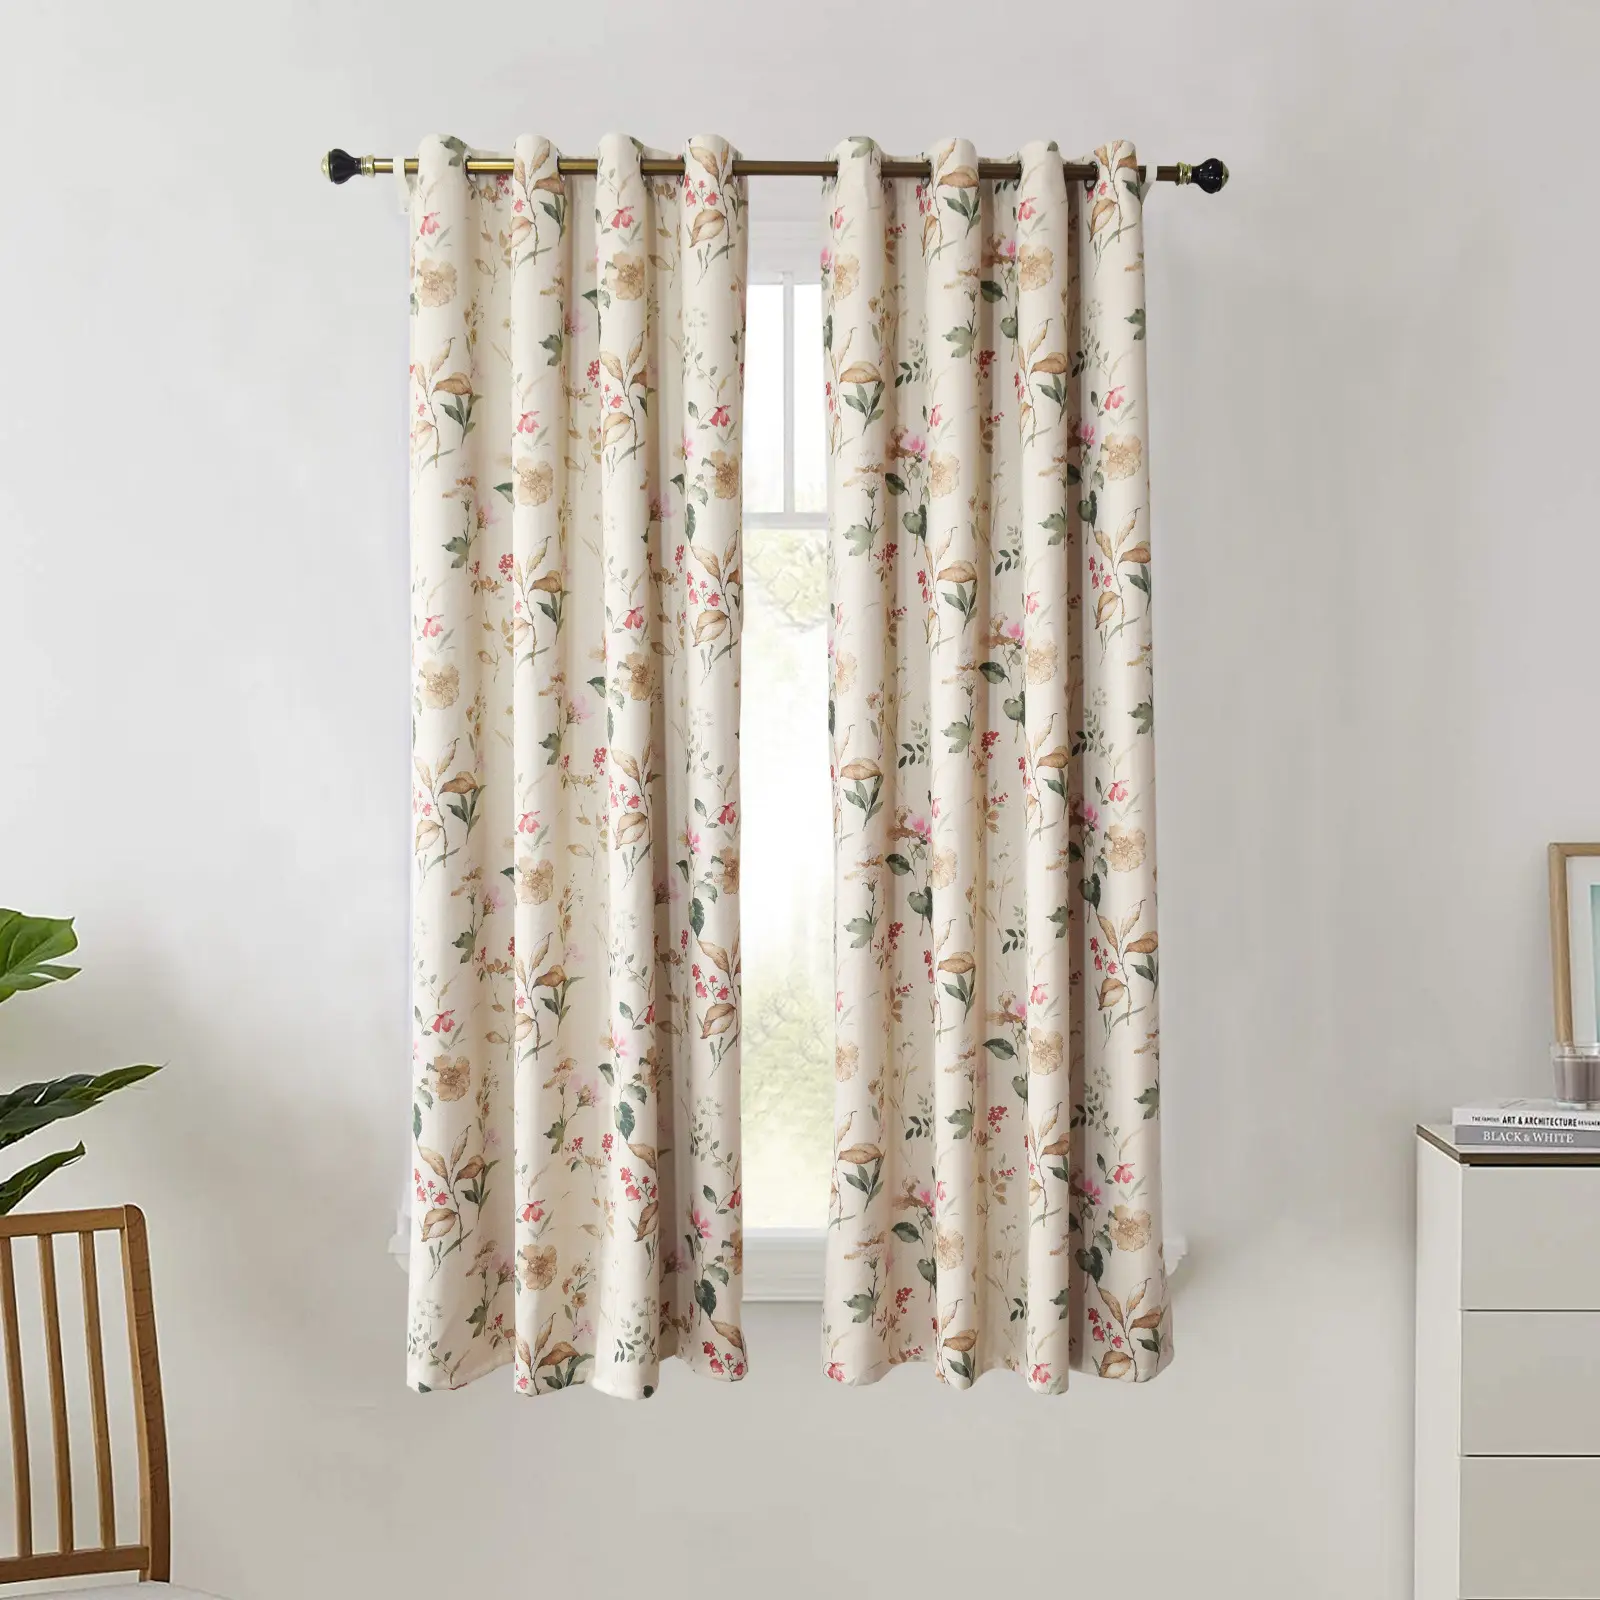 Floral Print Blackout Curtains and Drapes for Bedroom, Modern Style Thermal Insulated Room Darkening Window Curtain for Nursery